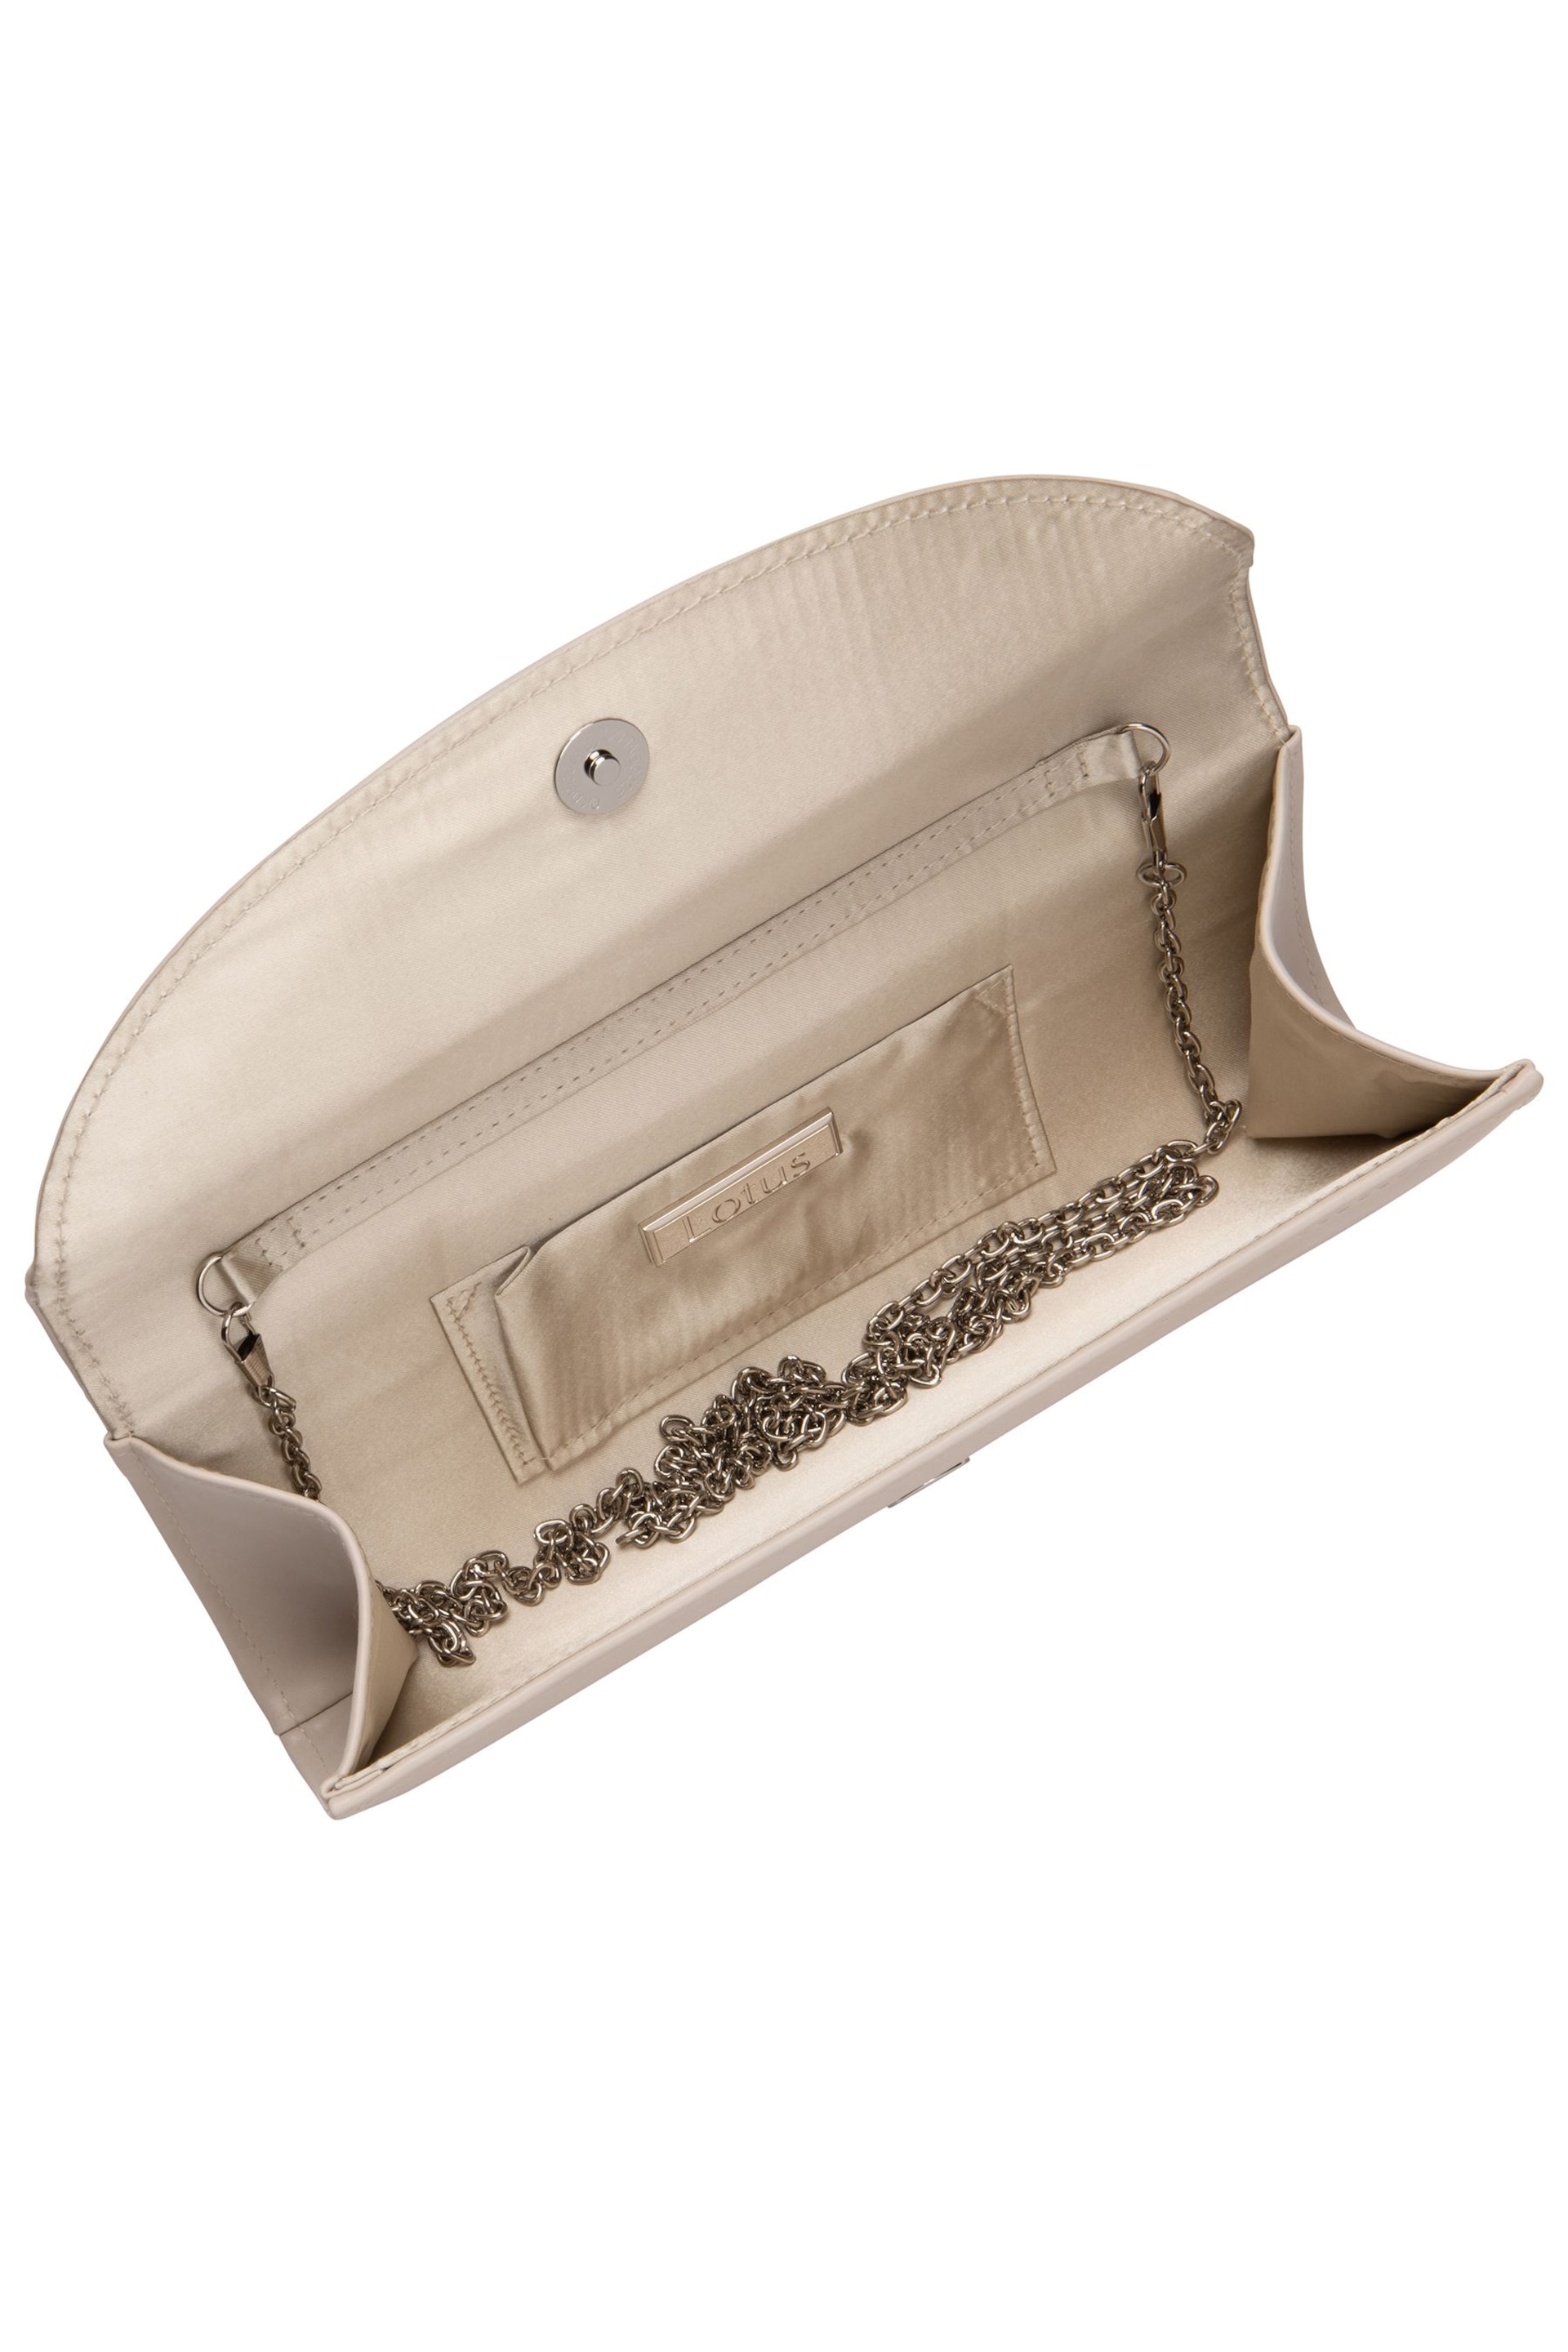 Lotus Nude Clutch Bag with Chain - Image 4 of 4